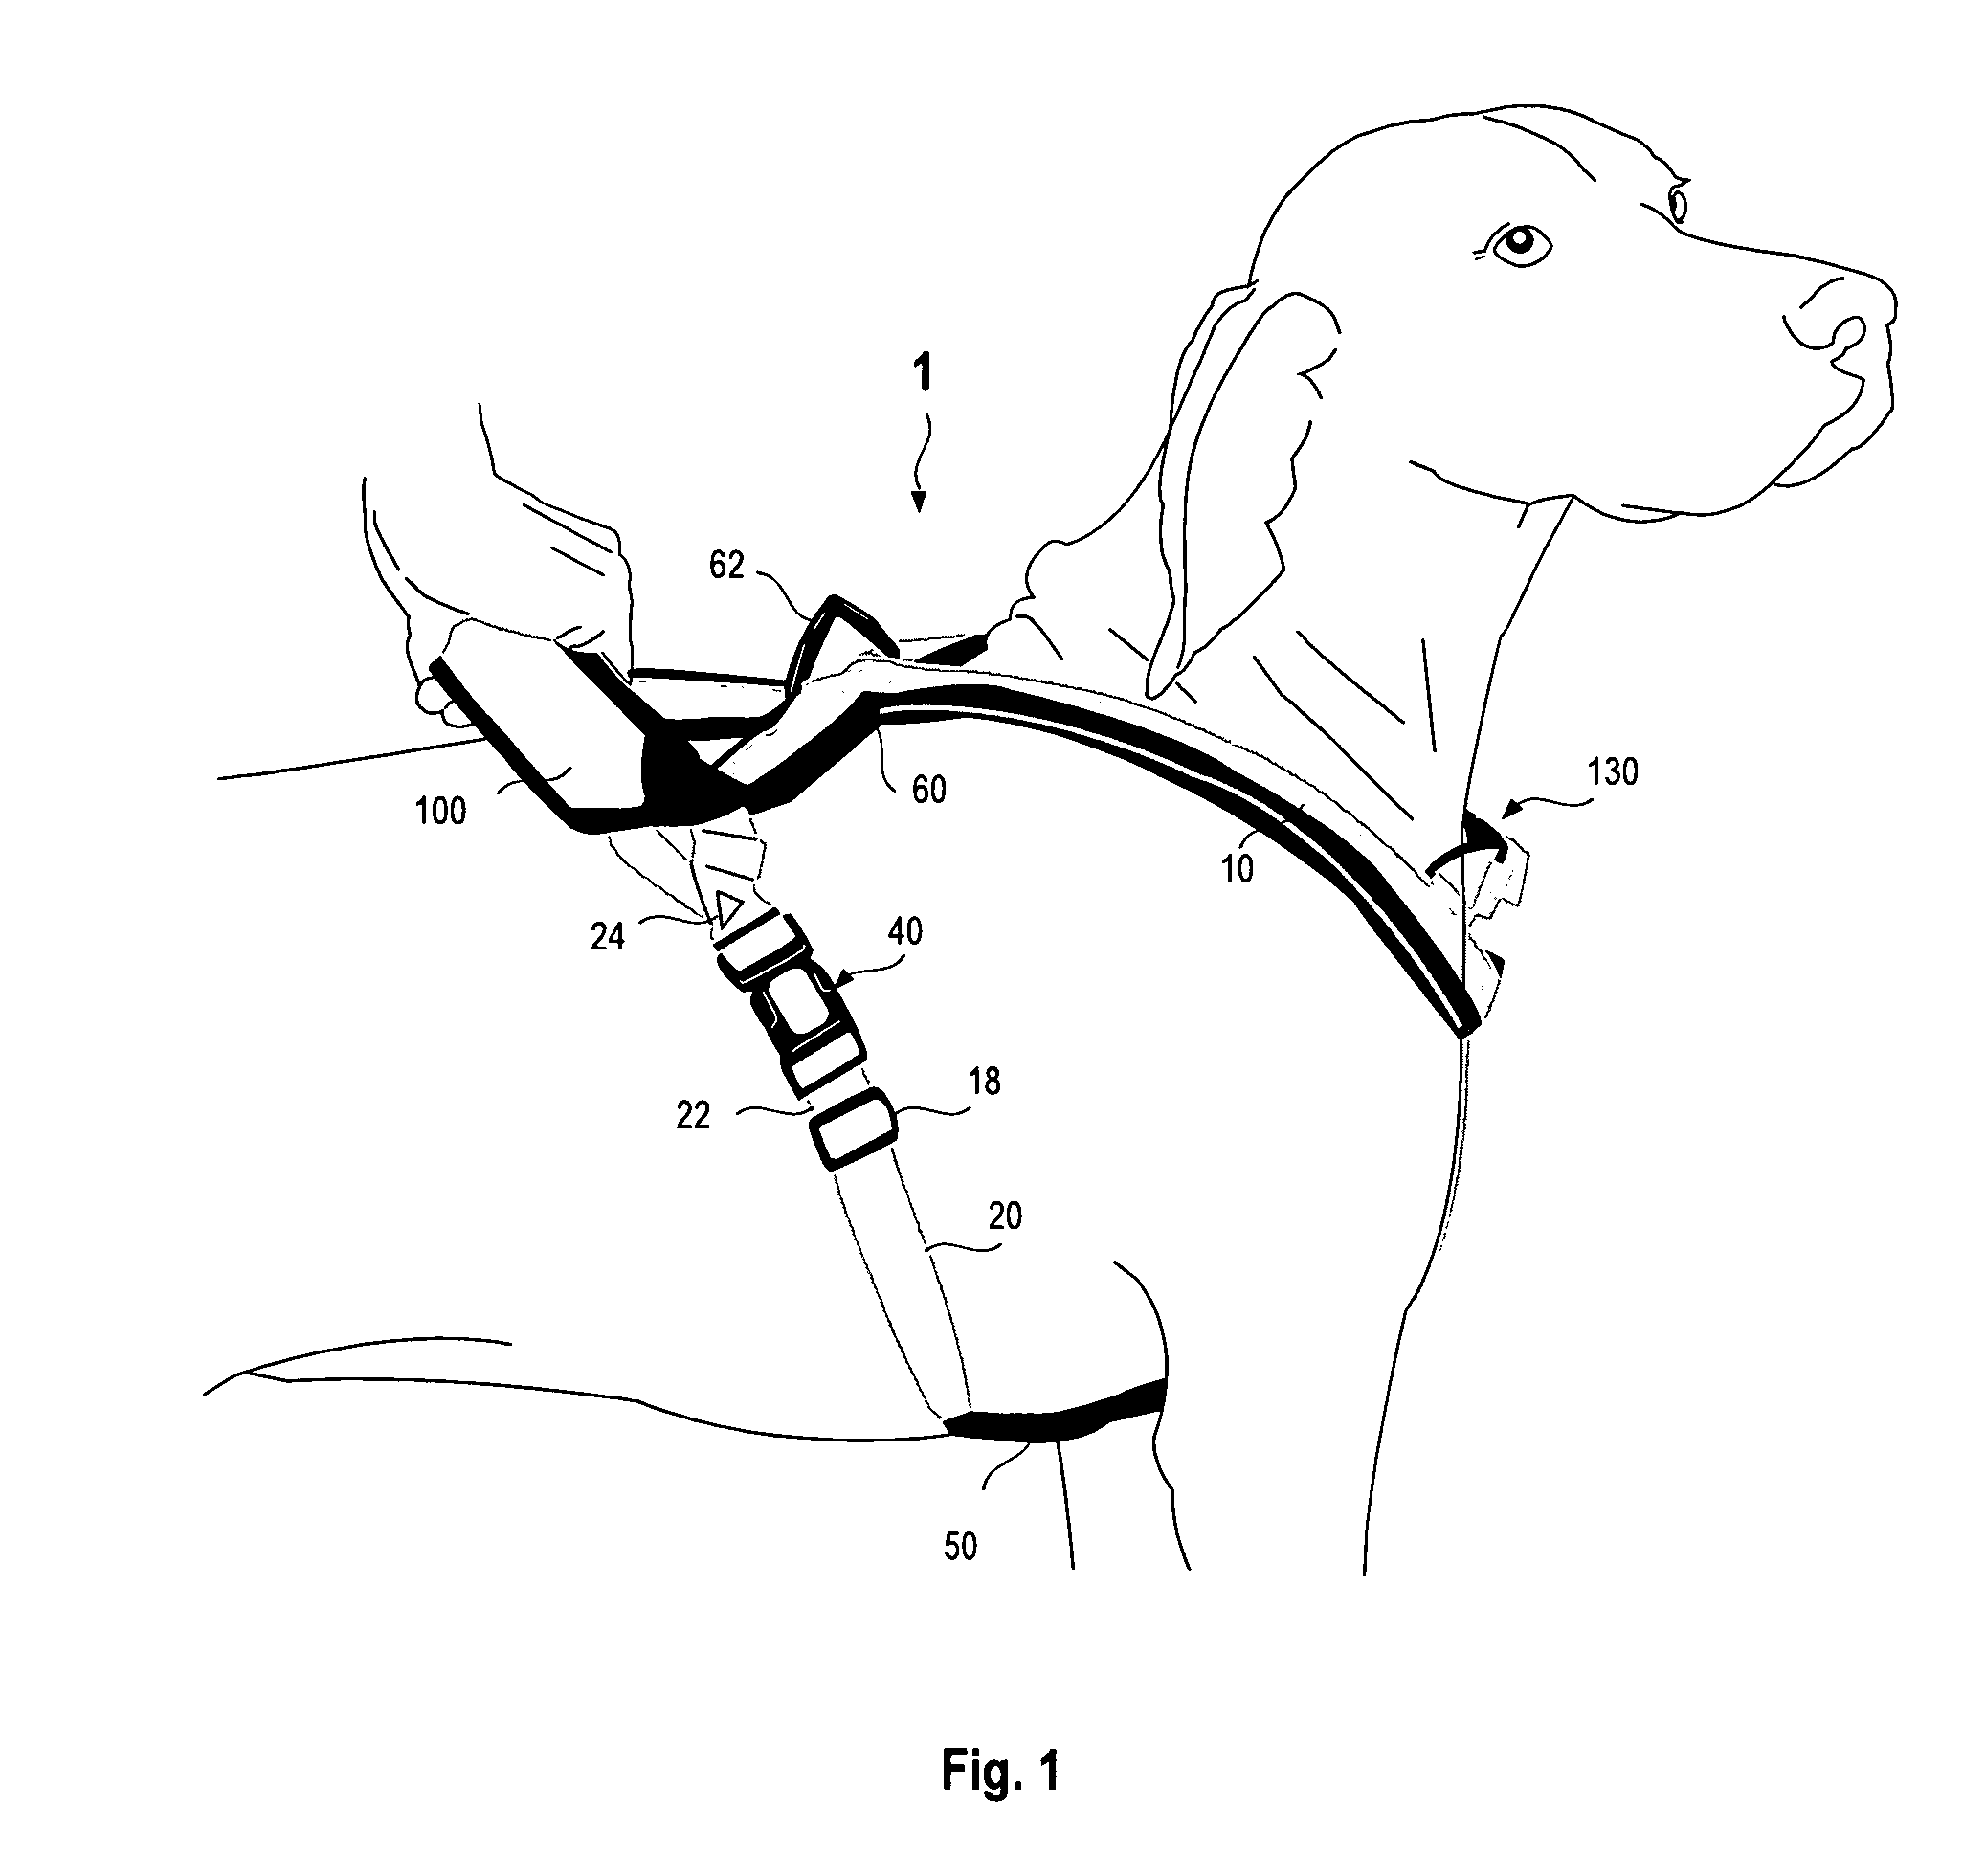 Animal harness with operable/closed position handle